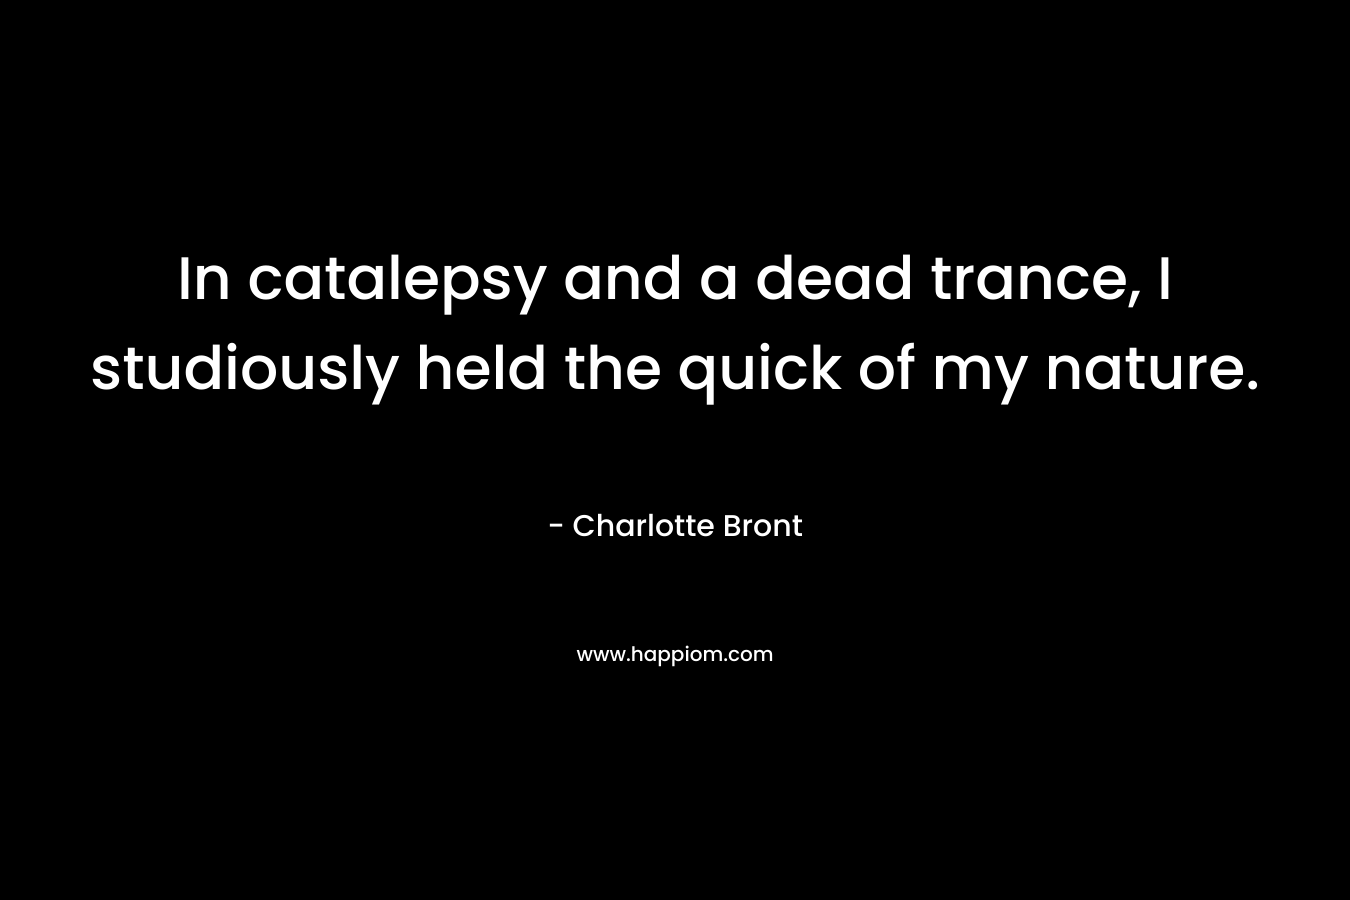 In catalepsy and a dead trance, I studiously held the quick of my nature. – Charlotte Bront